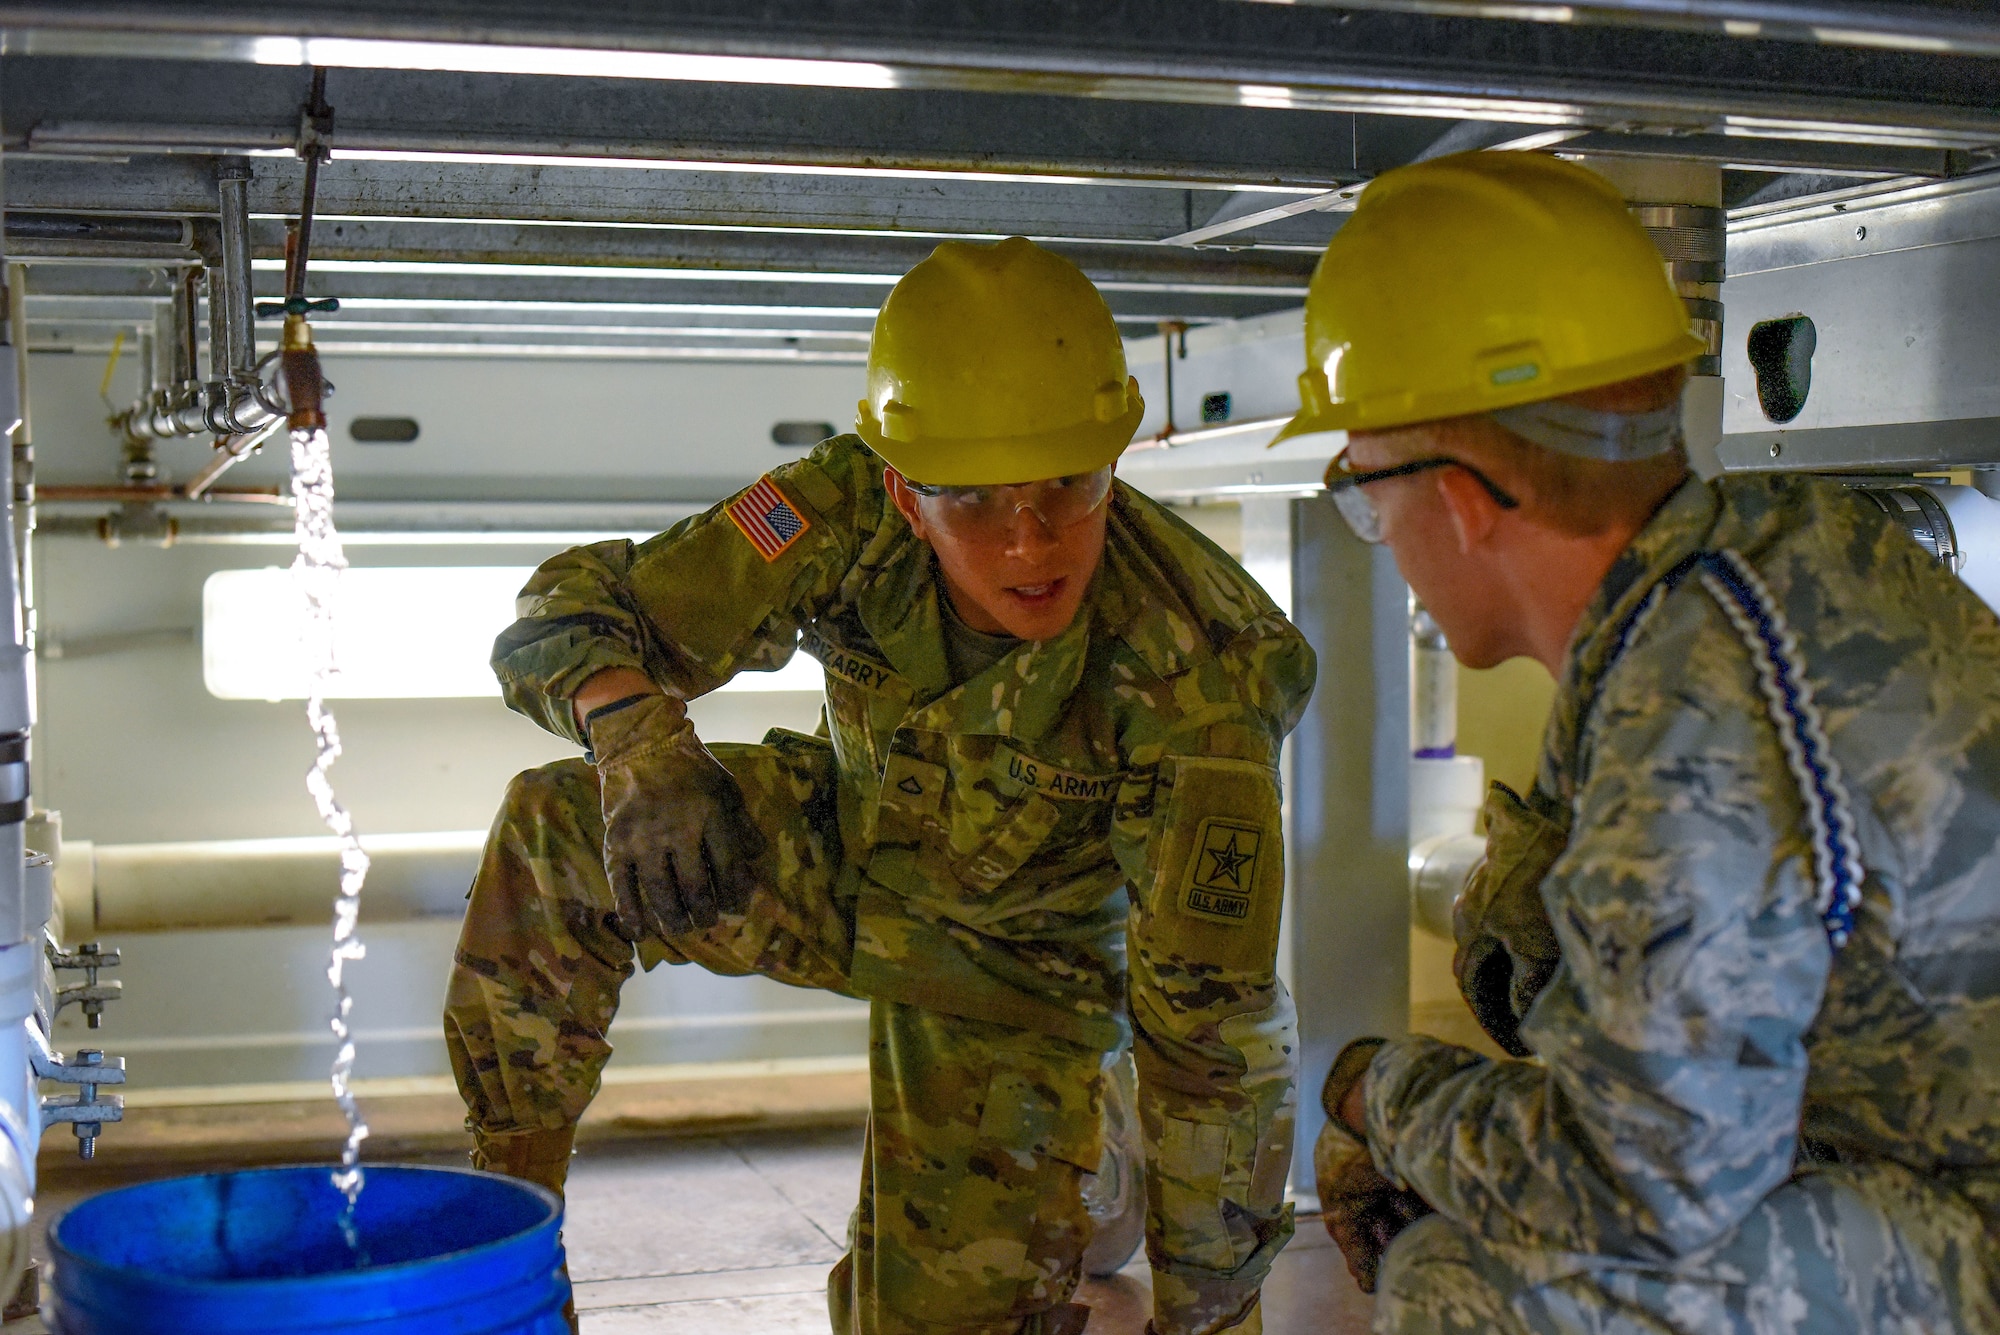 Water and Fuels Systems Maintenance training at Sheppard AFB